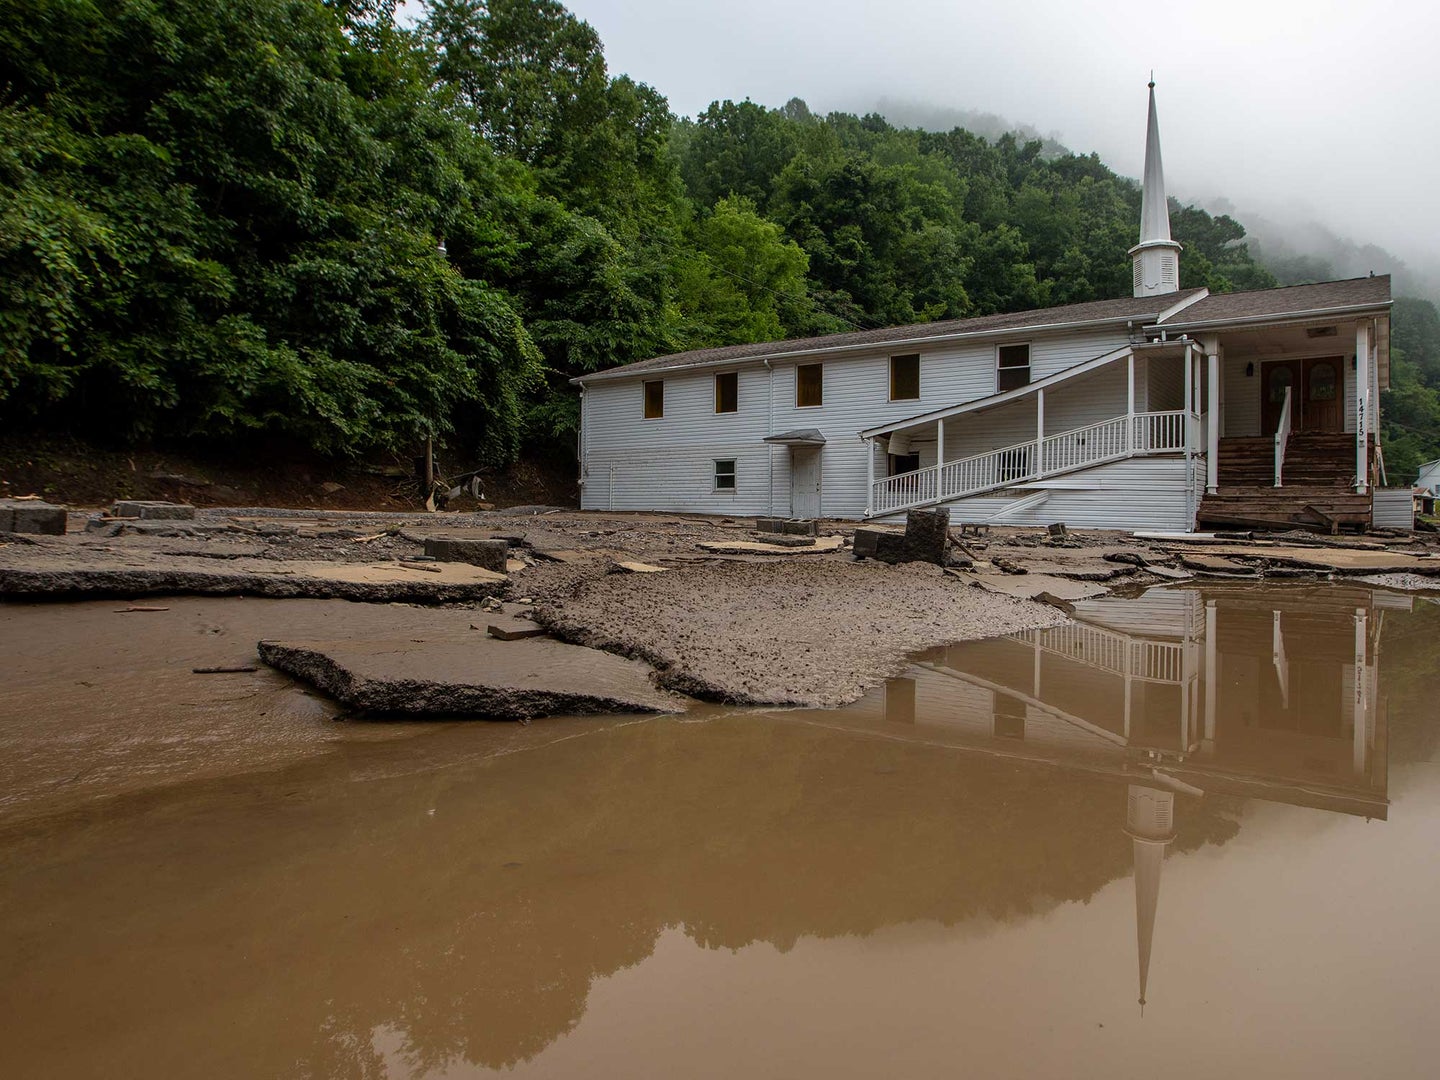 A view of damage after a severe storm hit the area located in the state's southwest region, bringing heavy rain and flooding in Buchanan County, United States on July 14, 2022. Seventeen people are missing in flooding and it also damaged more than 100 homes and caused power outages. 